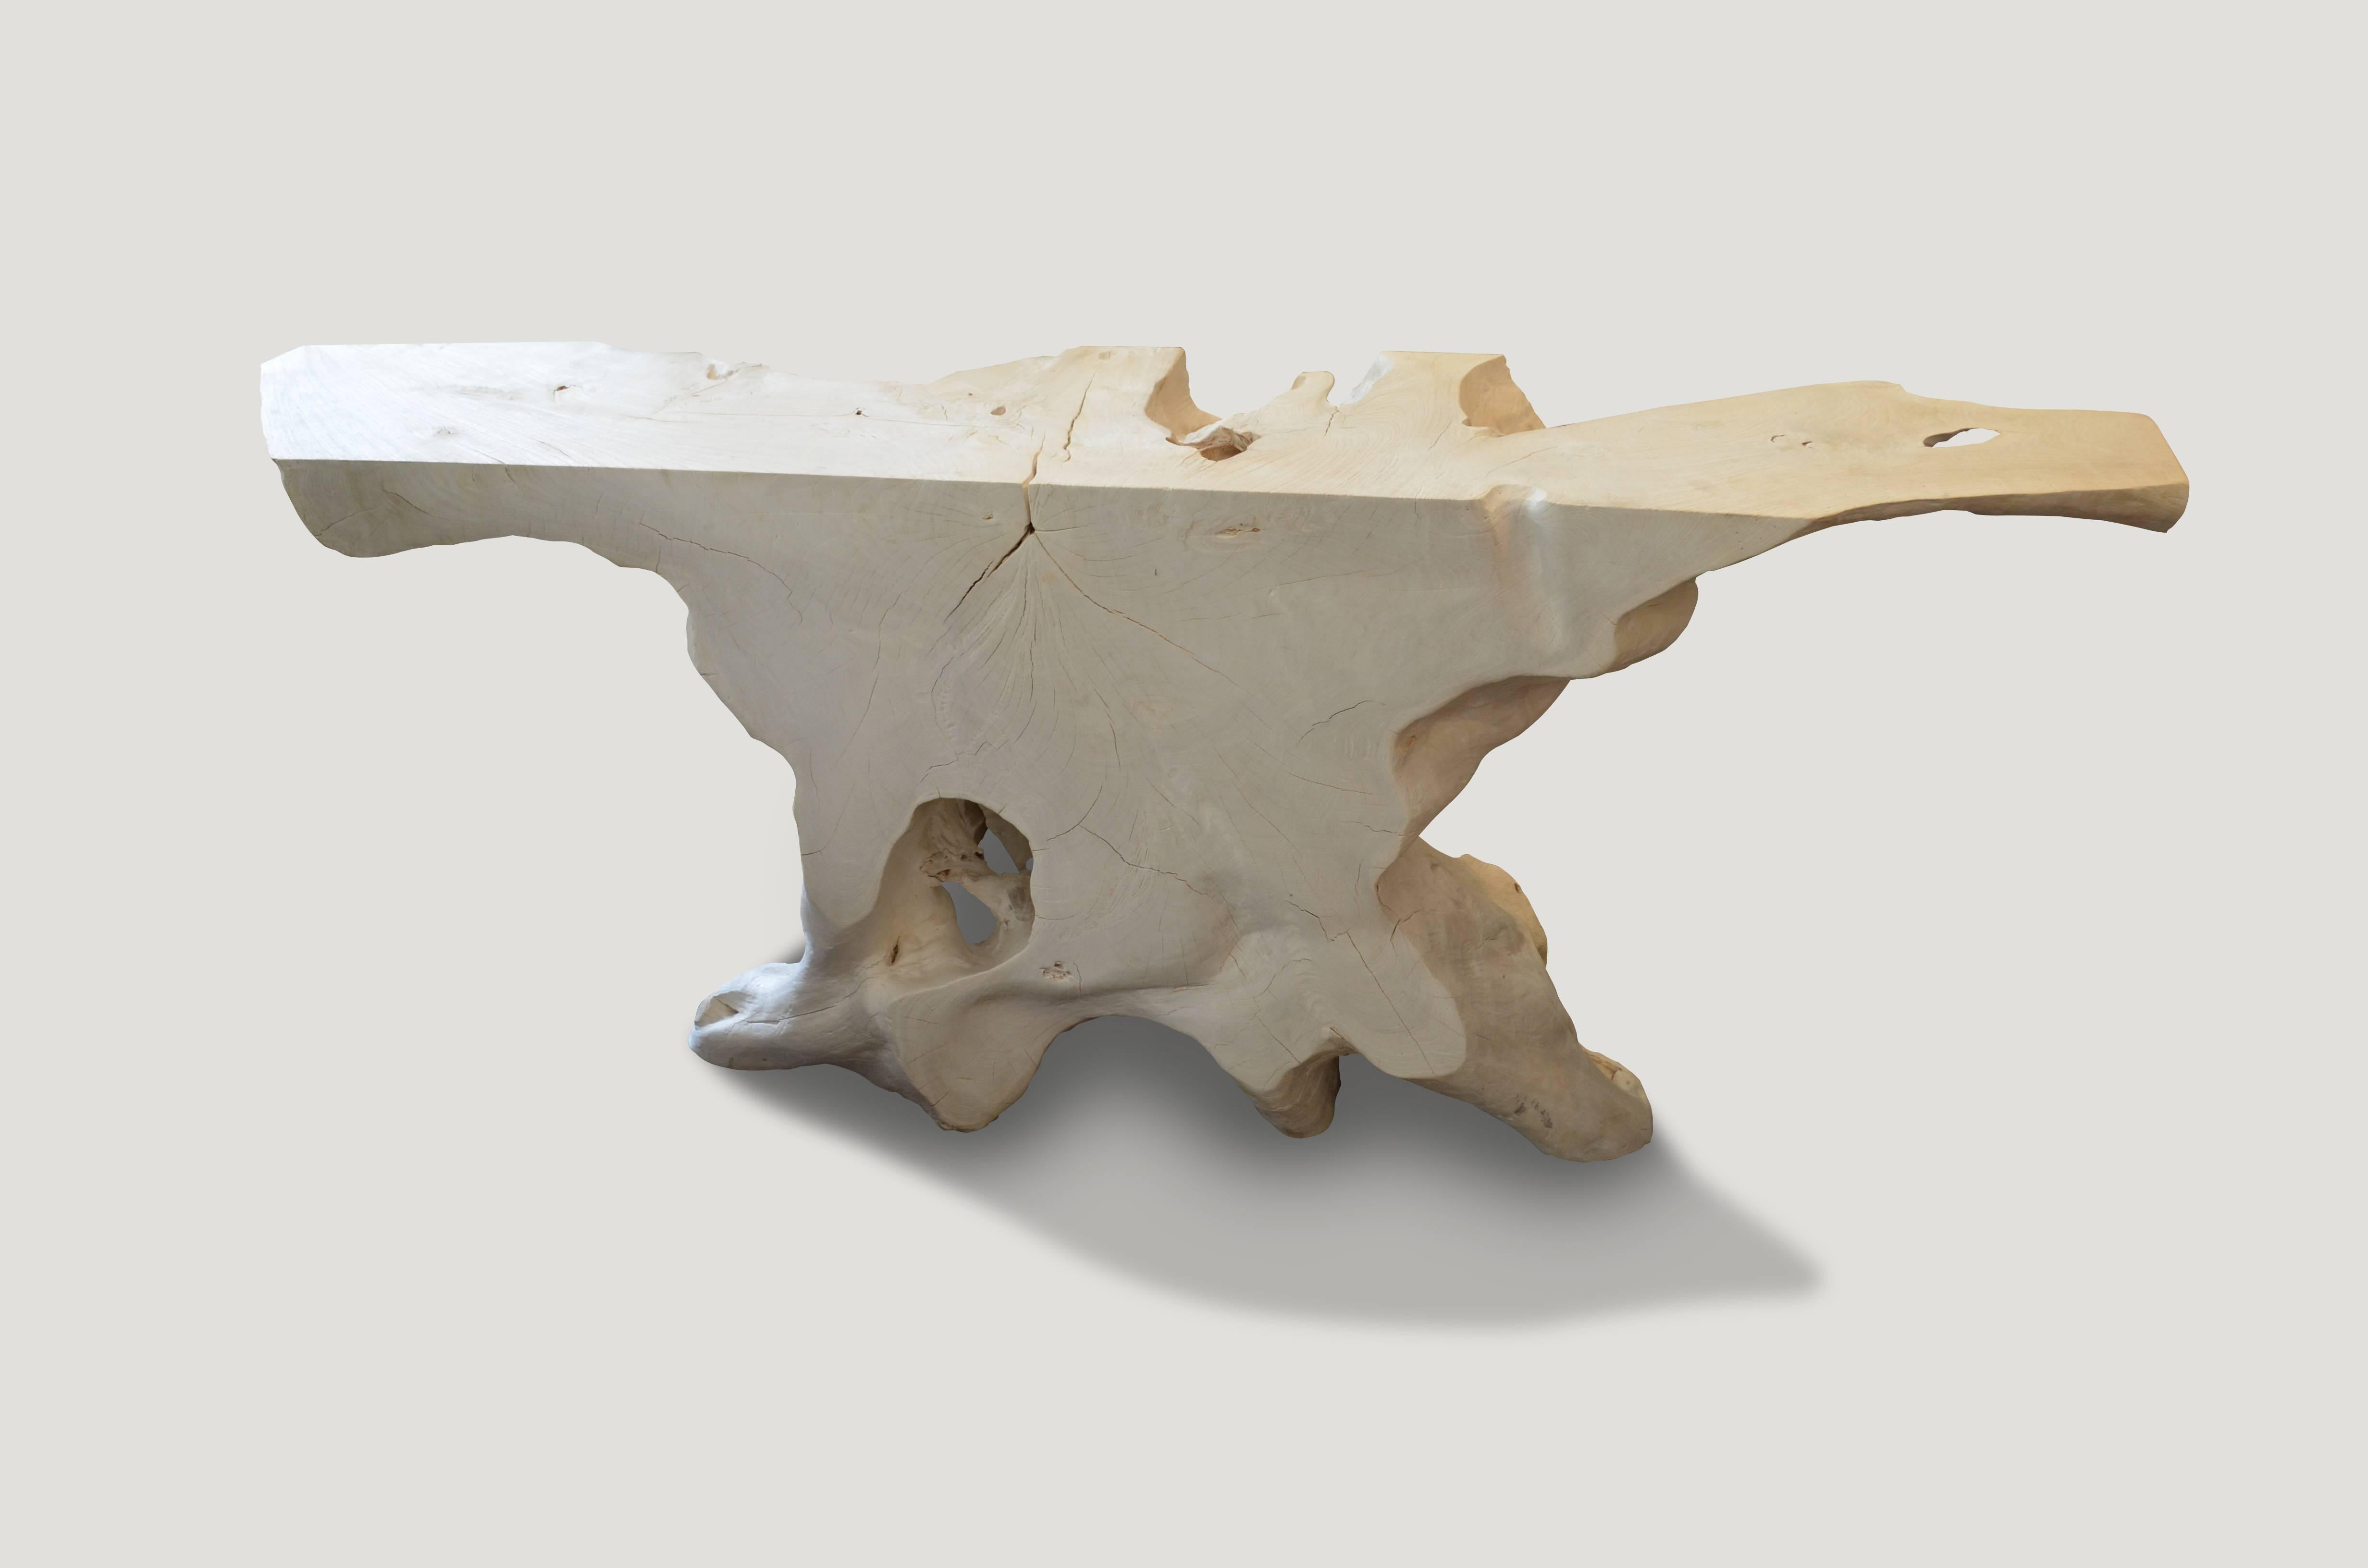 Natural organic formed console or coffee table made from a hundred year old reclaimed teak wood root. Fabulous on both sides. Glass or Lucite can be added on the top section. Organic is the new modern. 80 x 16 x 30.5